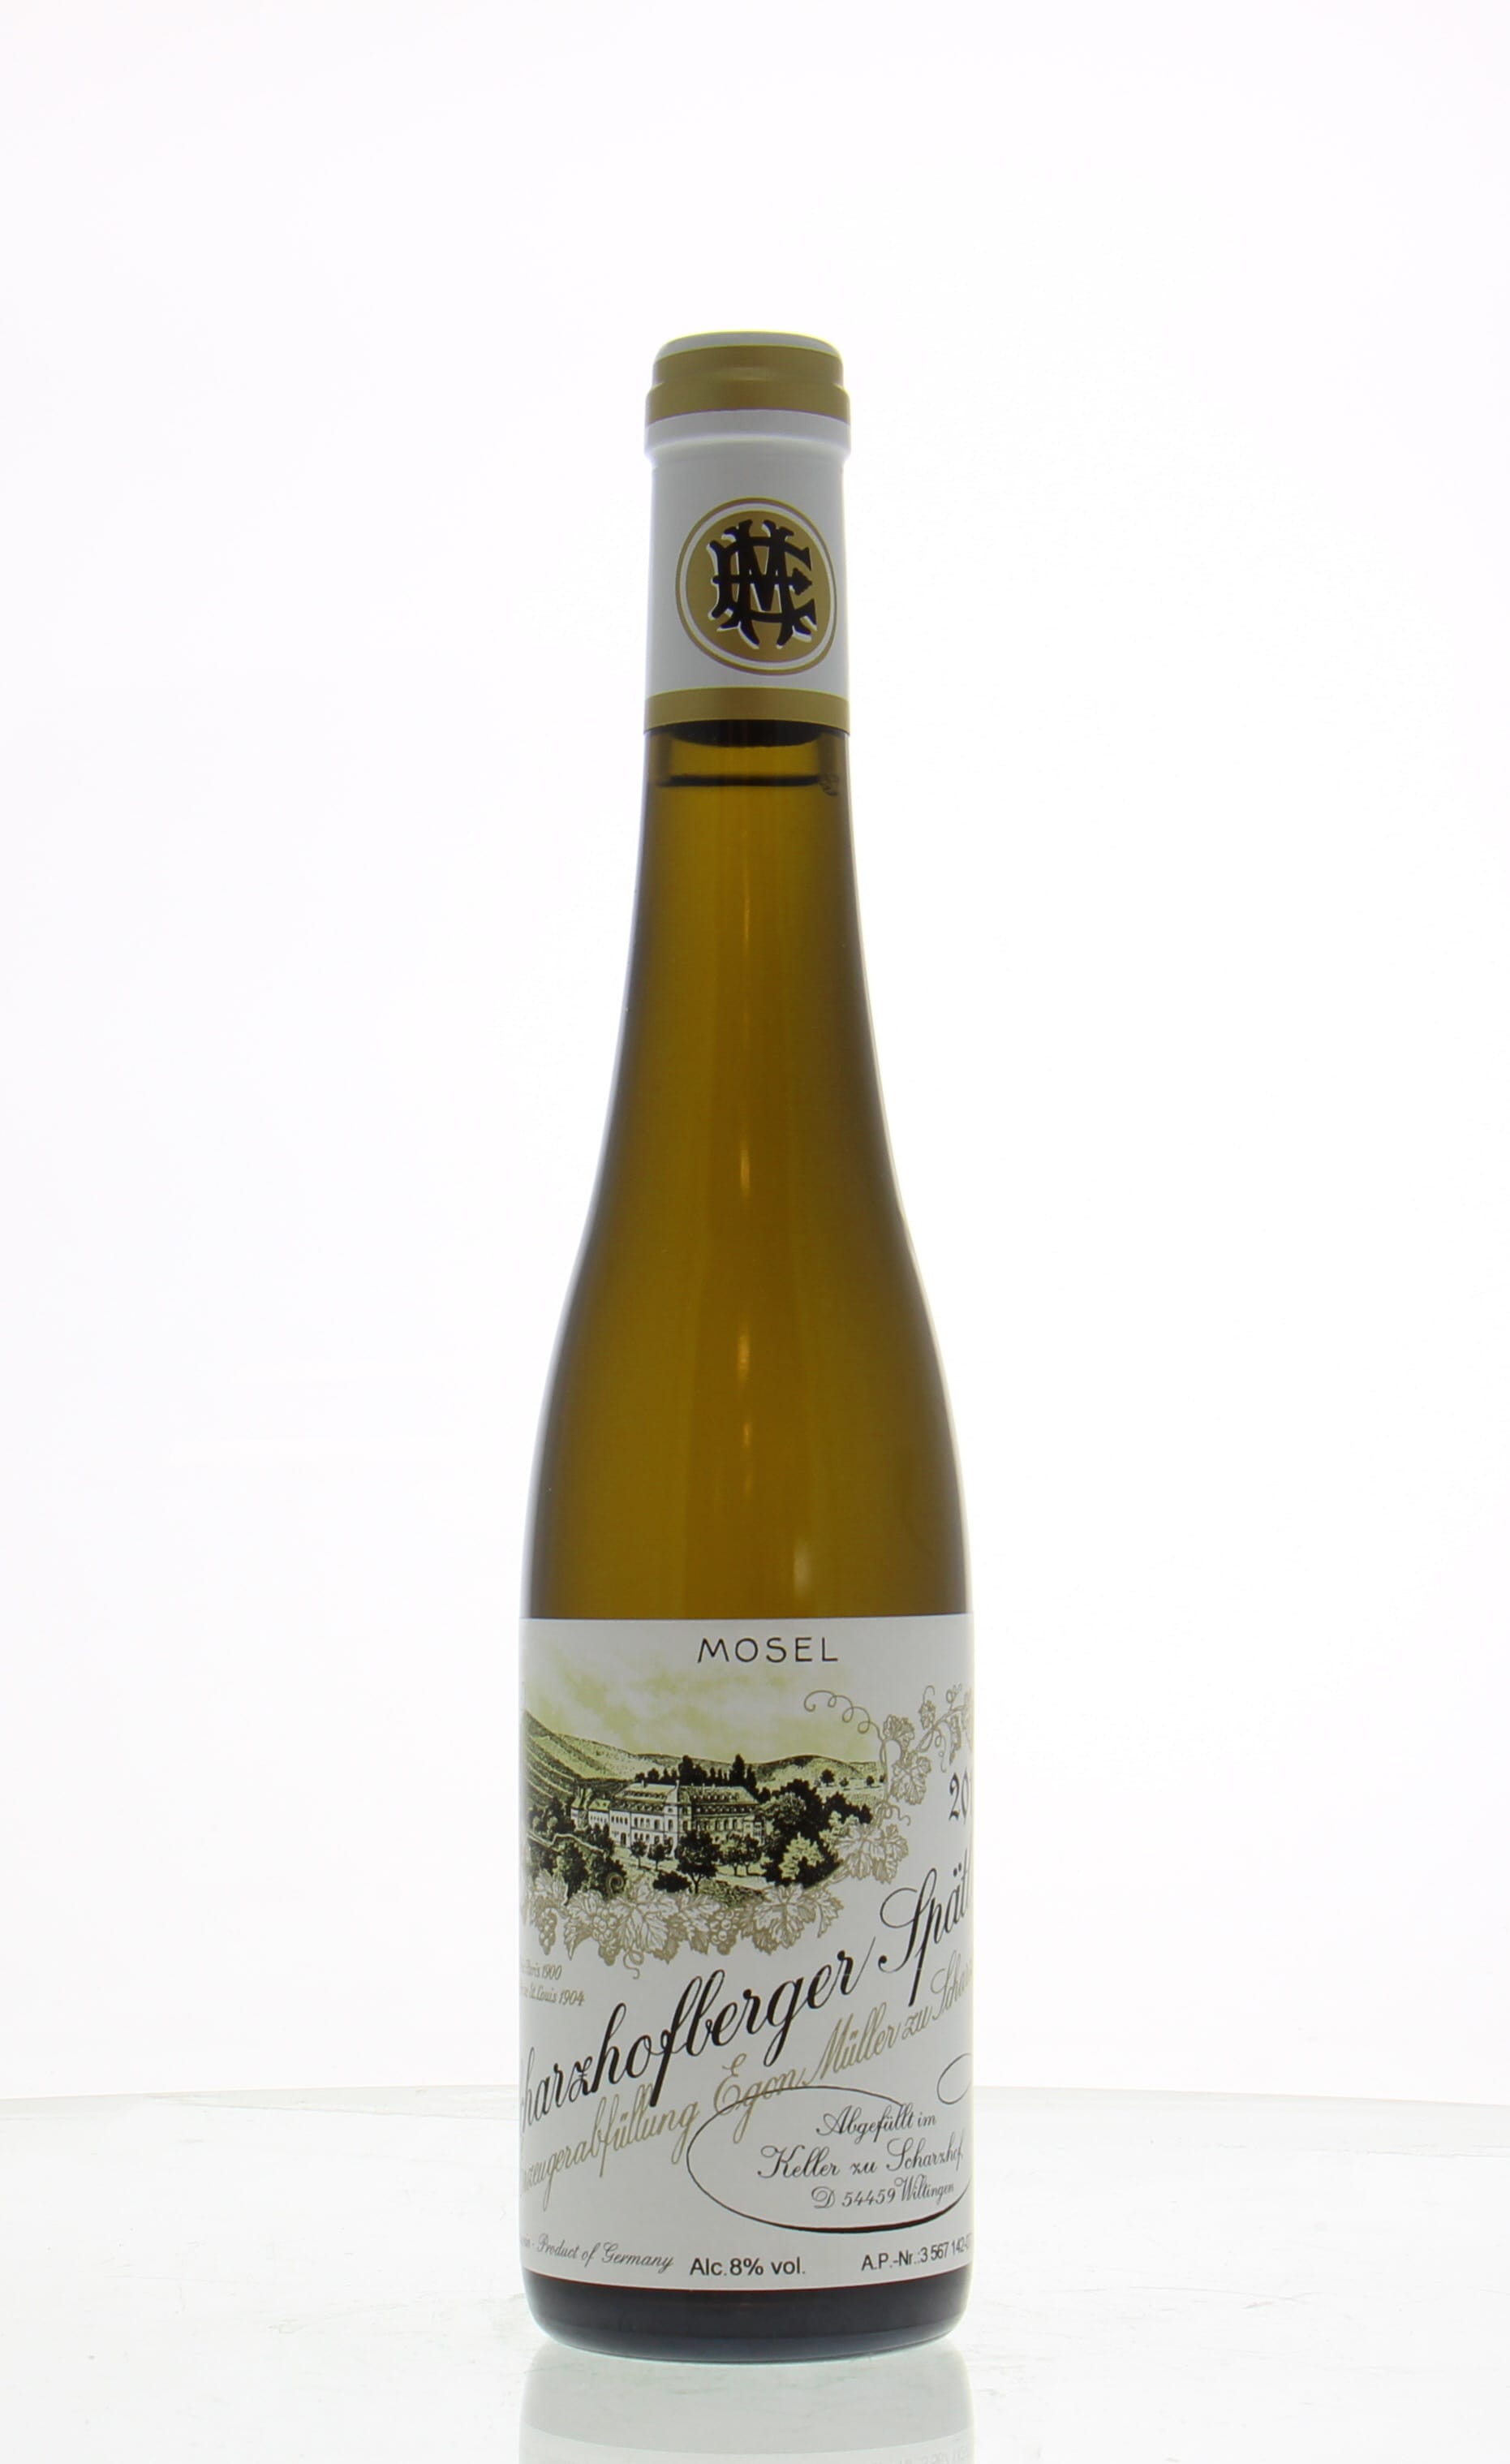 Egon Muller - Scharzhofberger Riesling Spatlese 2015 Perfect